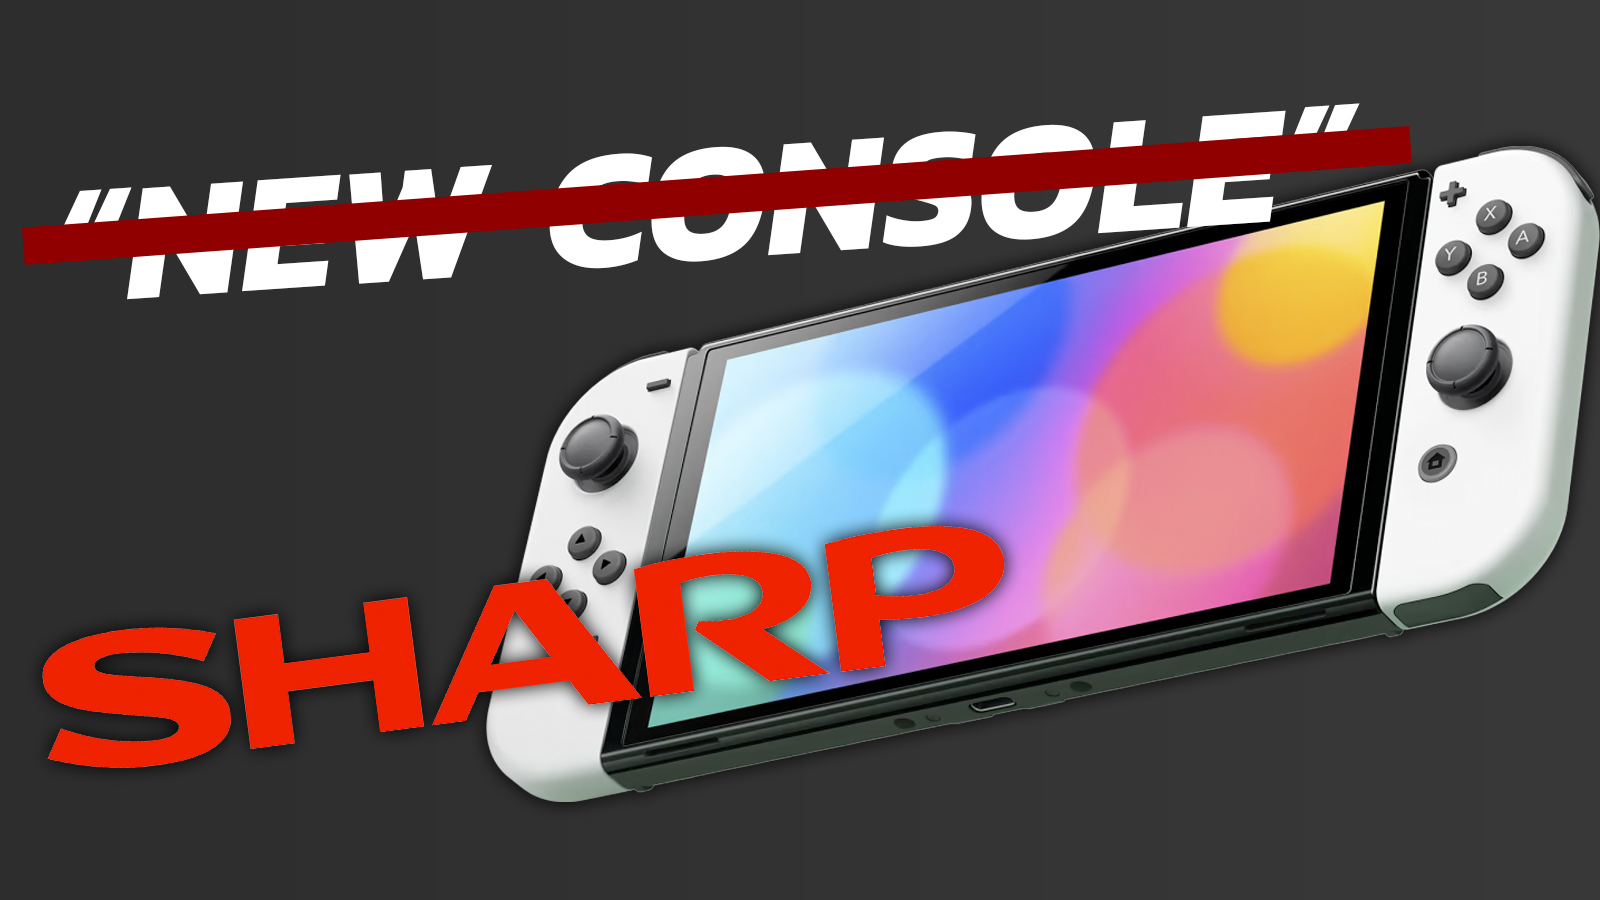 Tech company Sharp deletes mention of “new game console” amid Switch 2 rumors – Egaxo